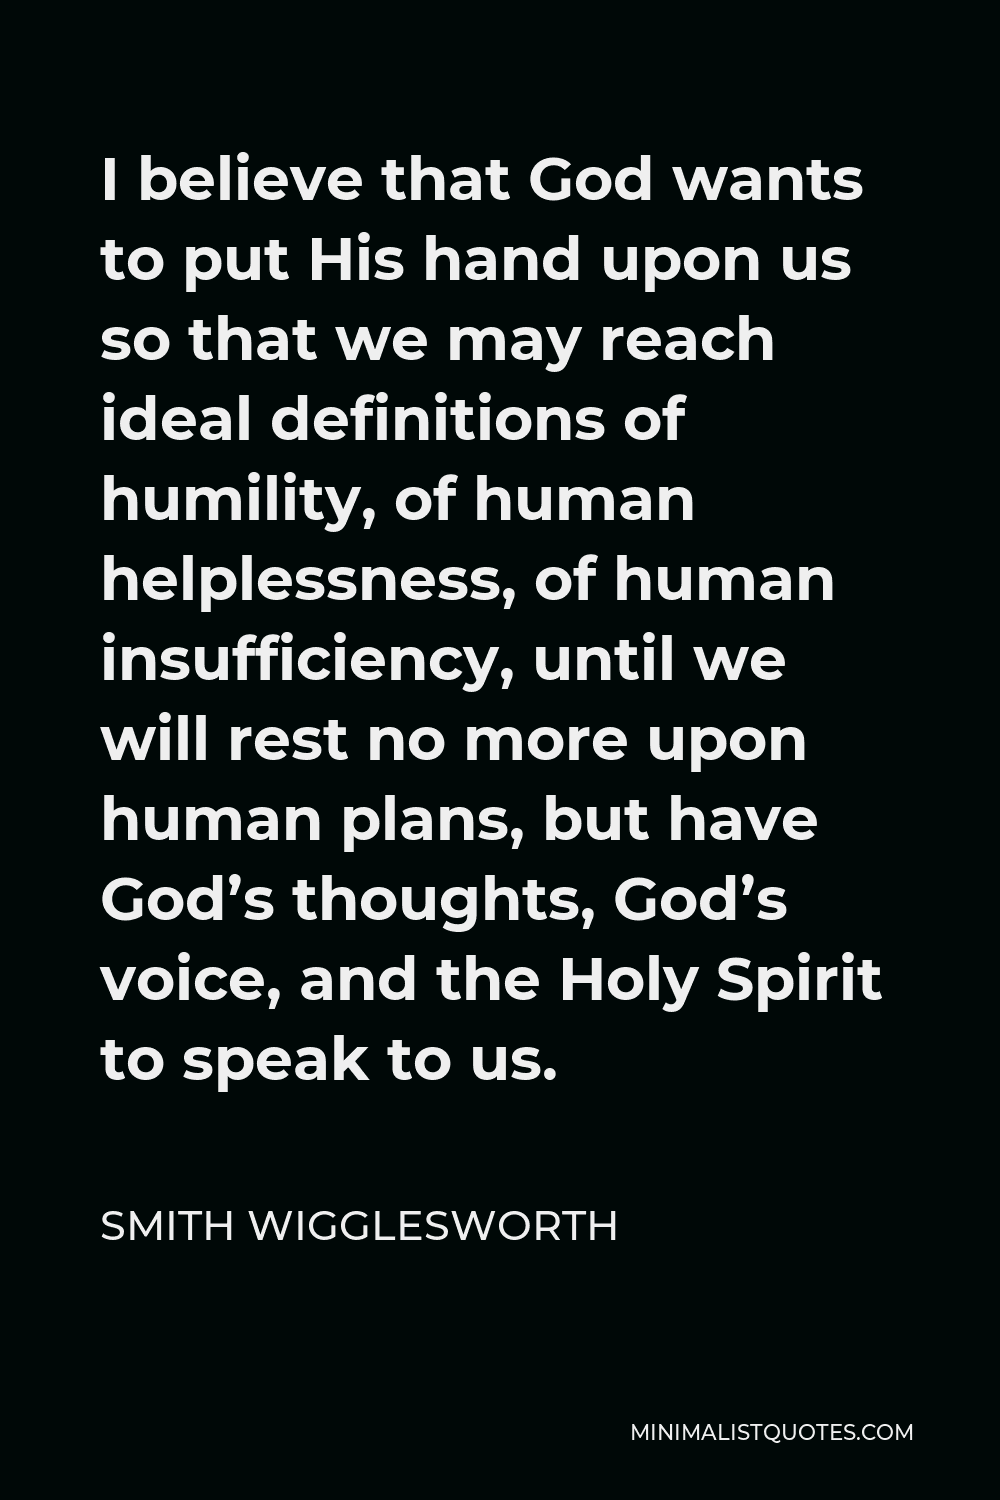 Smith Wigglesworth Quote - I believe that God wants to put His hand upon us so that we may reach ideal definitions of humility, of human helplessness, of human insufficiency, until we will rest no more upon human plans, but have God’s thoughts, God’s voice, and the Holy Spirit to speak to us.